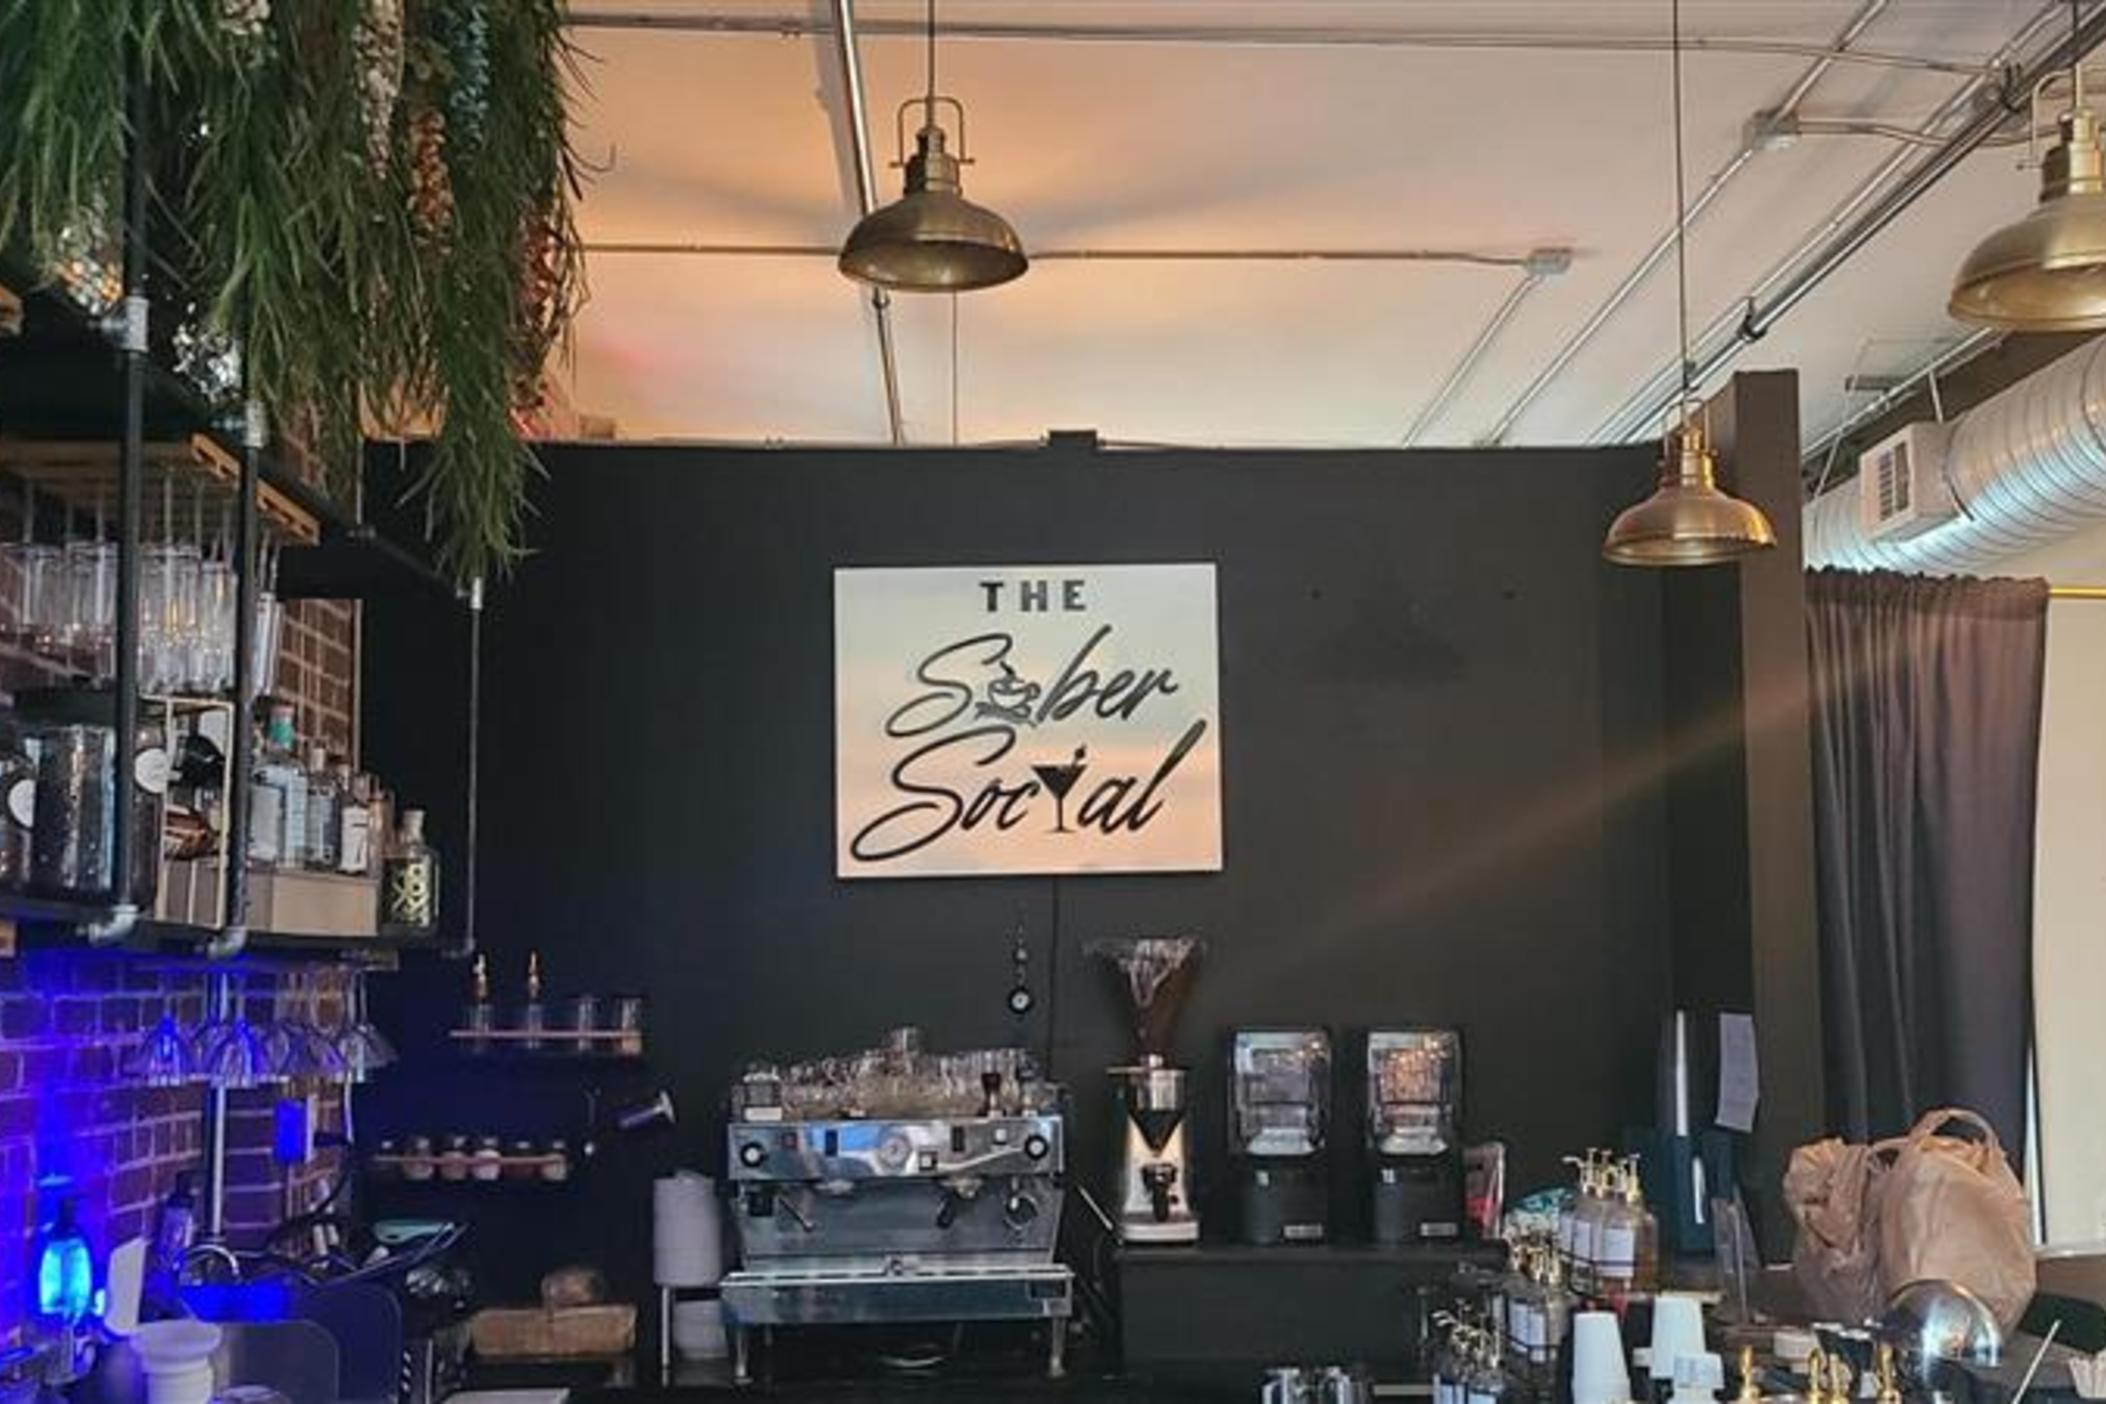 The Sober Social is an alcohol free bar and coffee shop offering a variety of cocktails, snacks, and games..